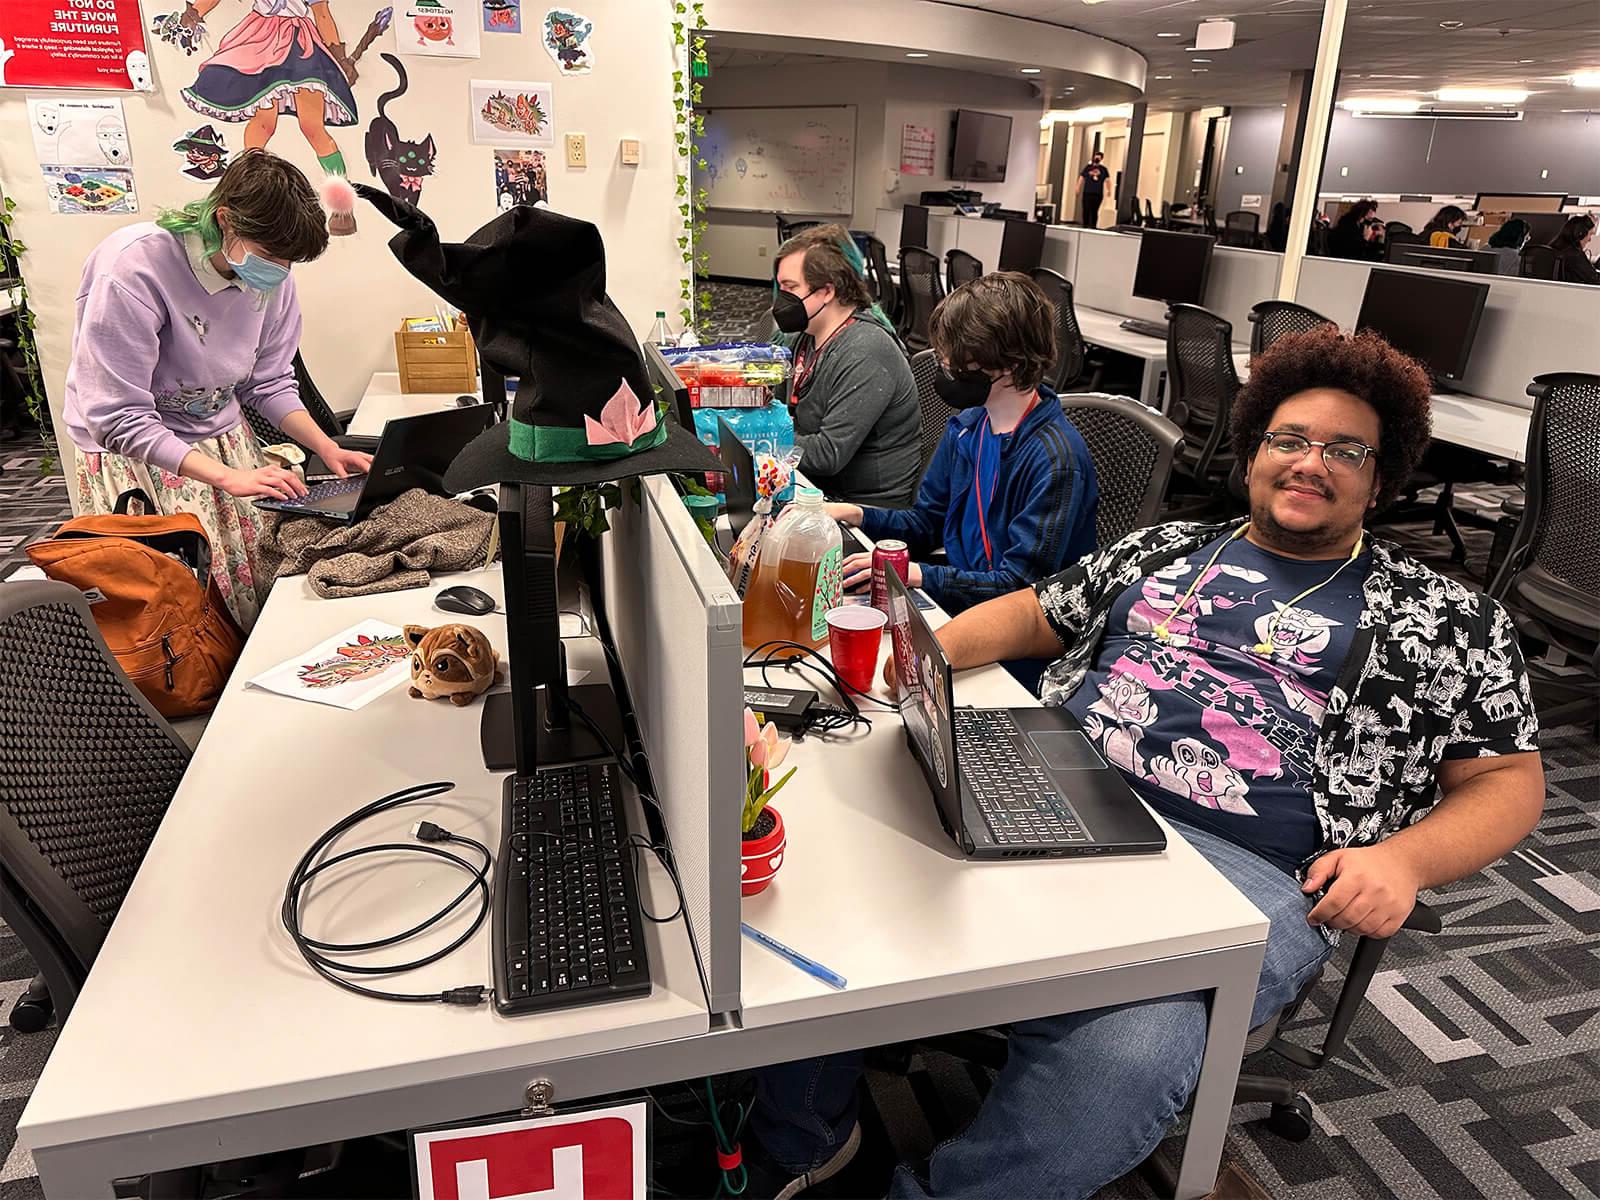 DigiPen students surrounded by snacks work on their Global Game Jam projects, one smiling for the camera.